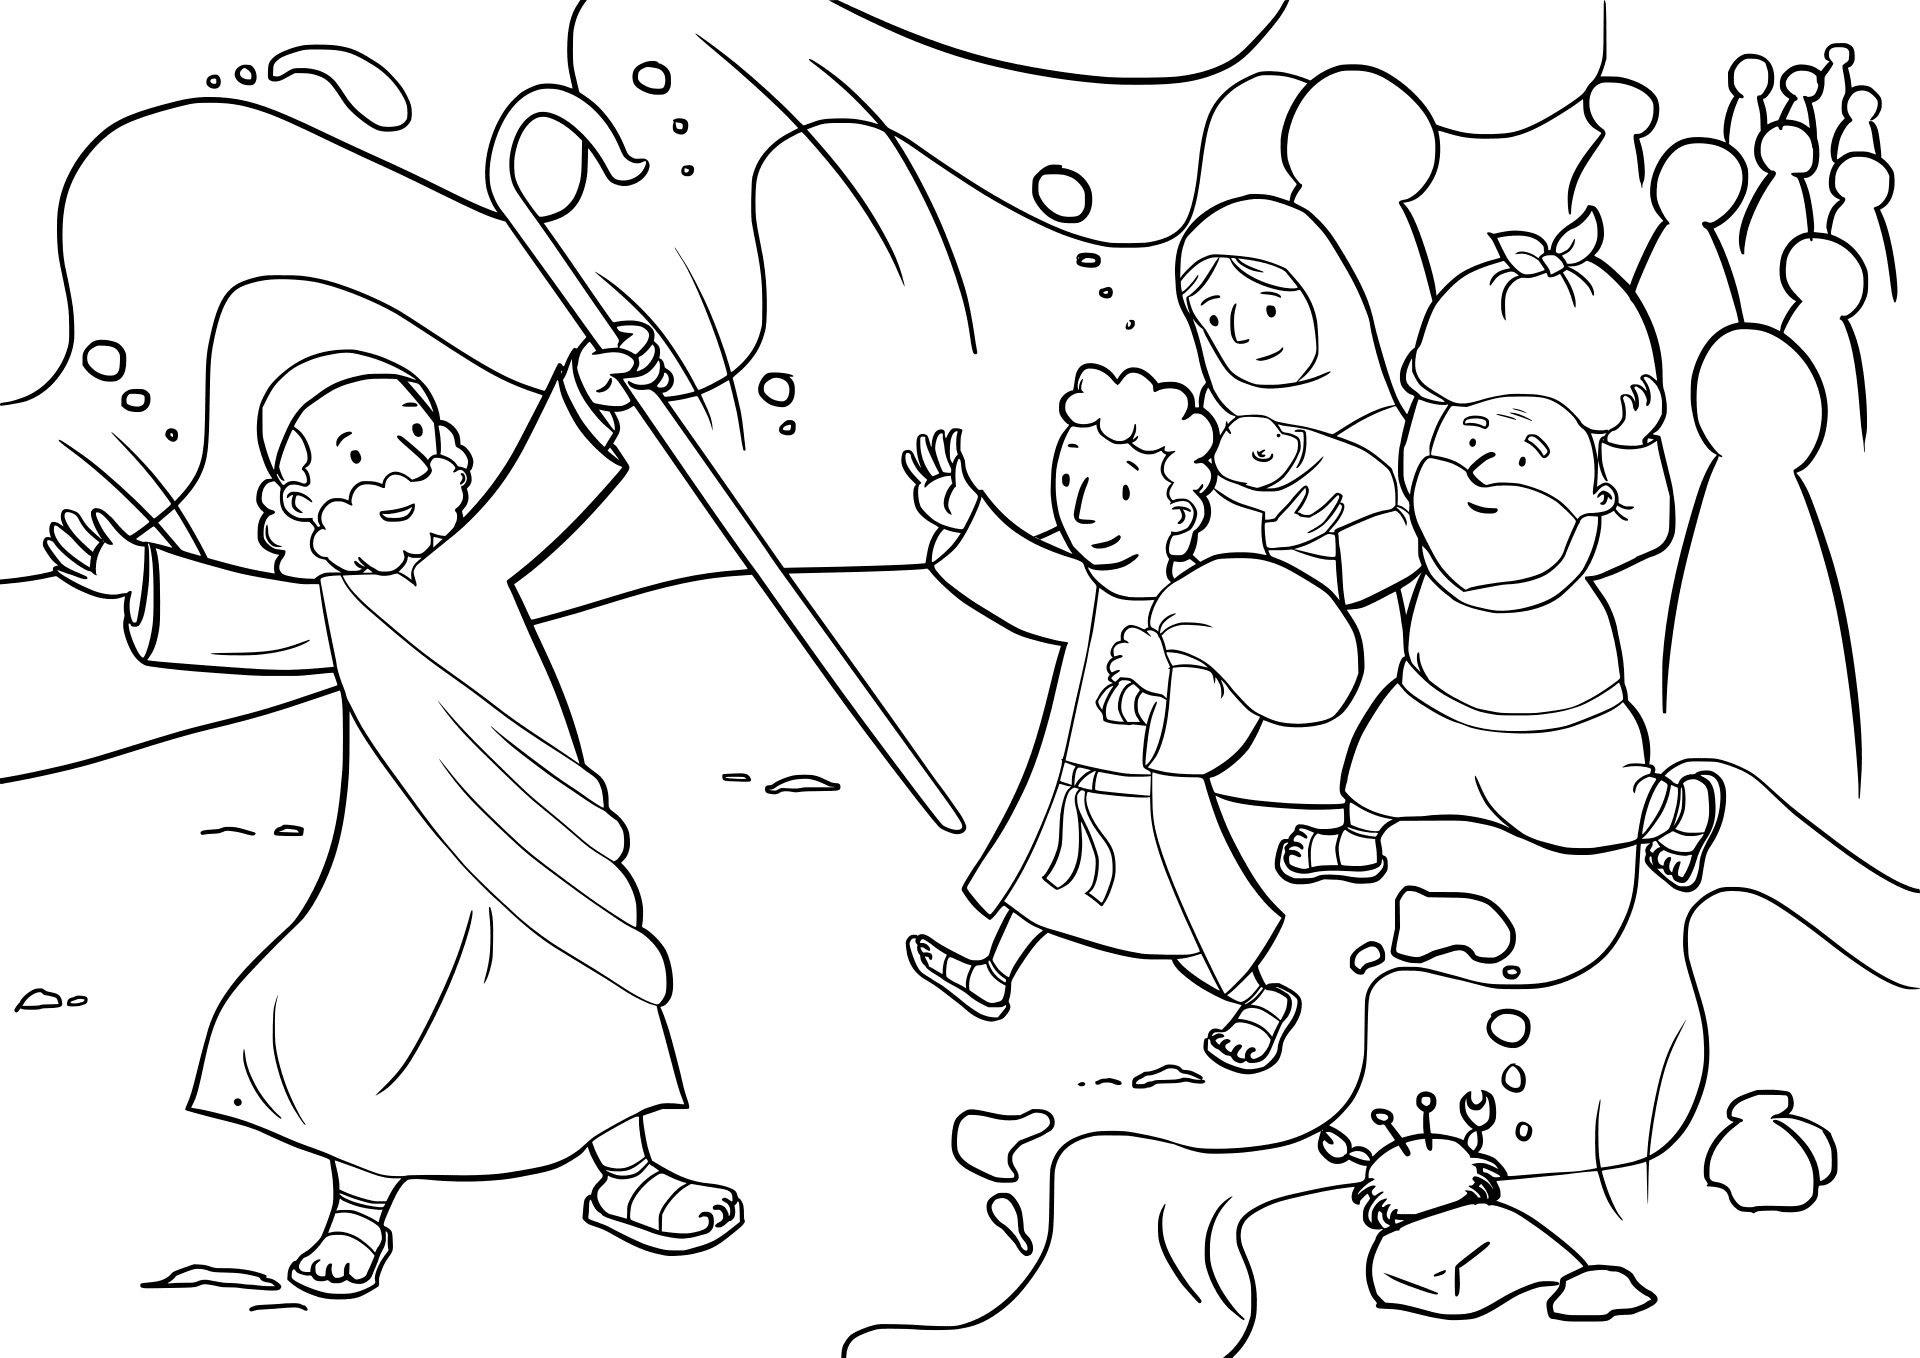 Exodus colouring pages can range from family friendly and fun to wtf rexjew